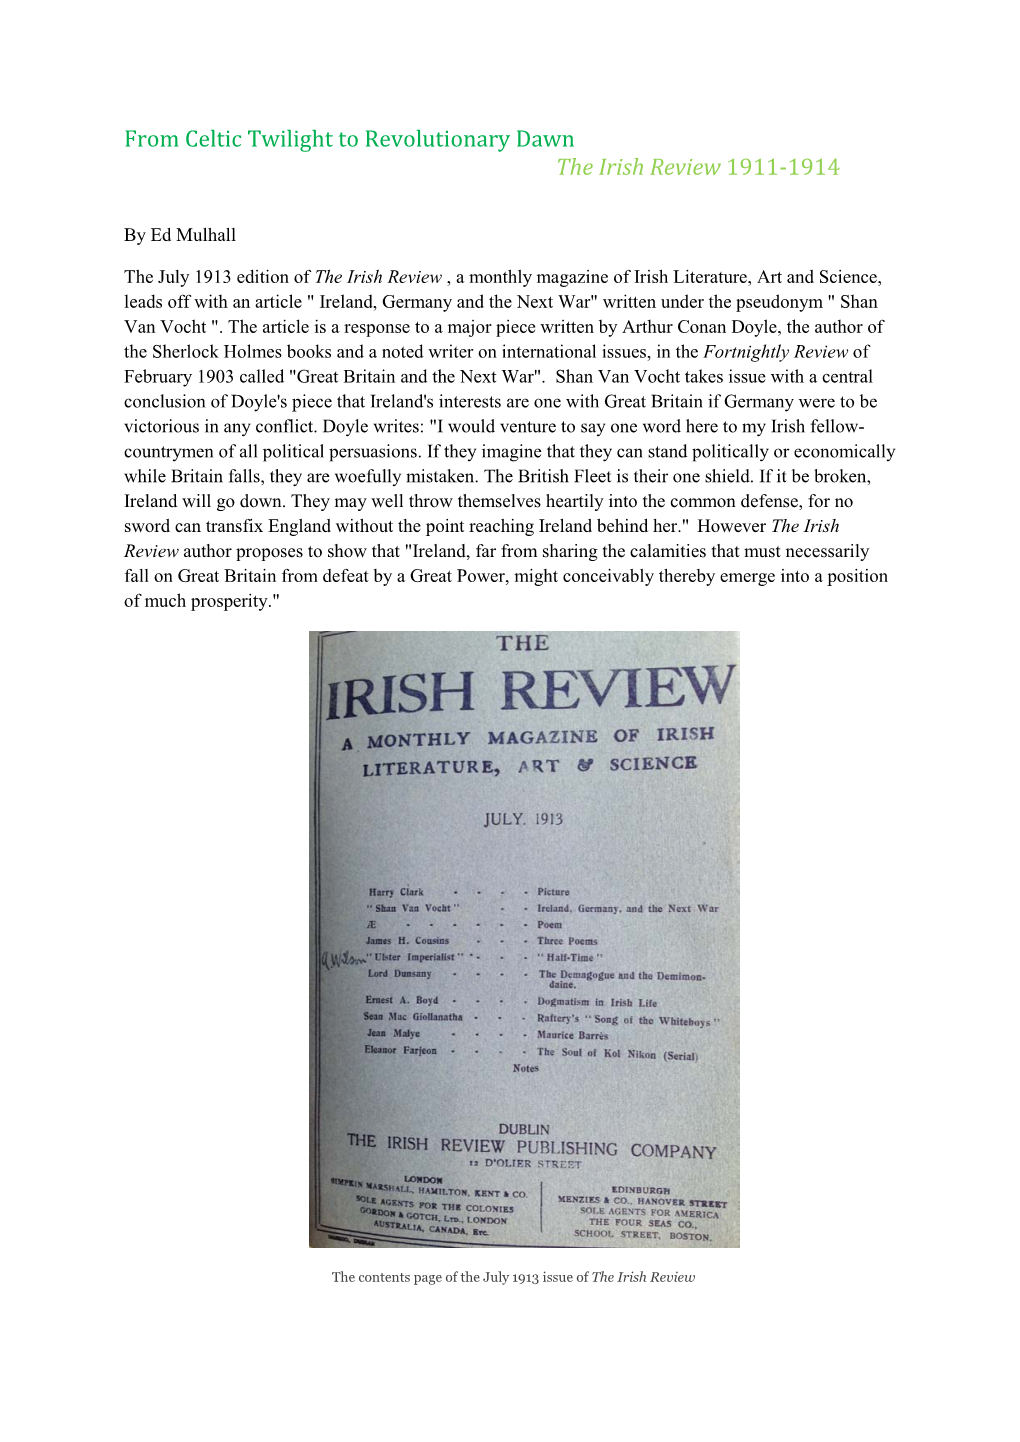 From Celtic Twilight to Revolutionary Dawn: the Irish Review, 1911-14